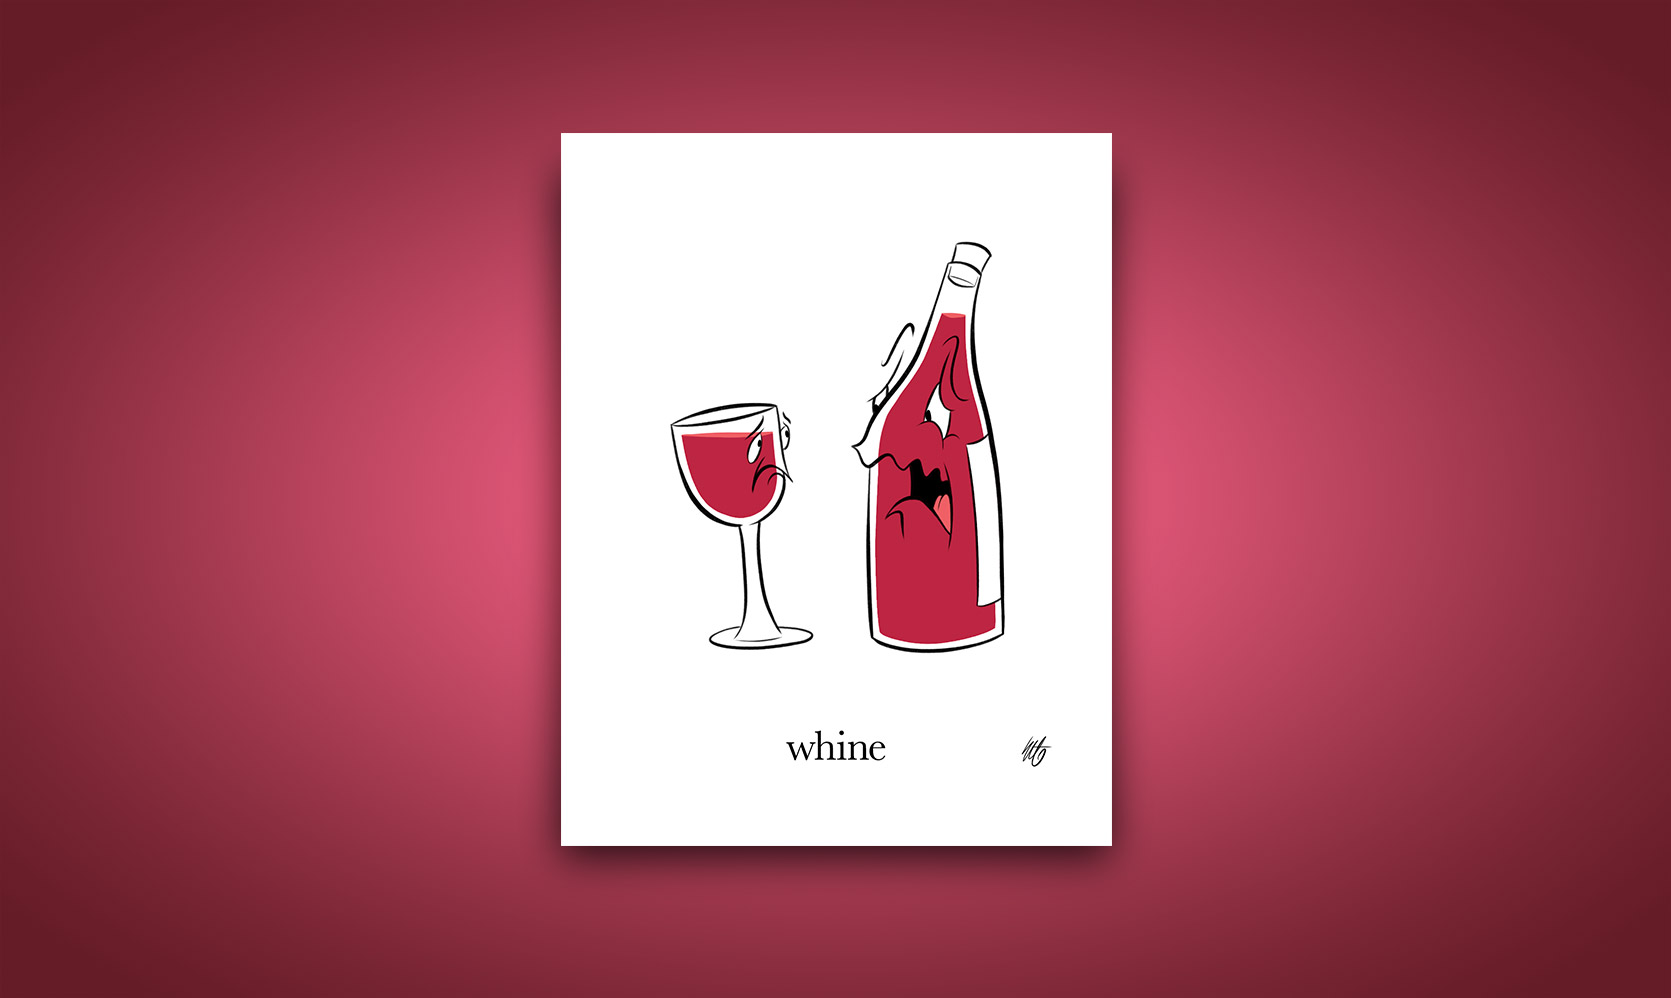 Whine – Postcard design available on Etsy